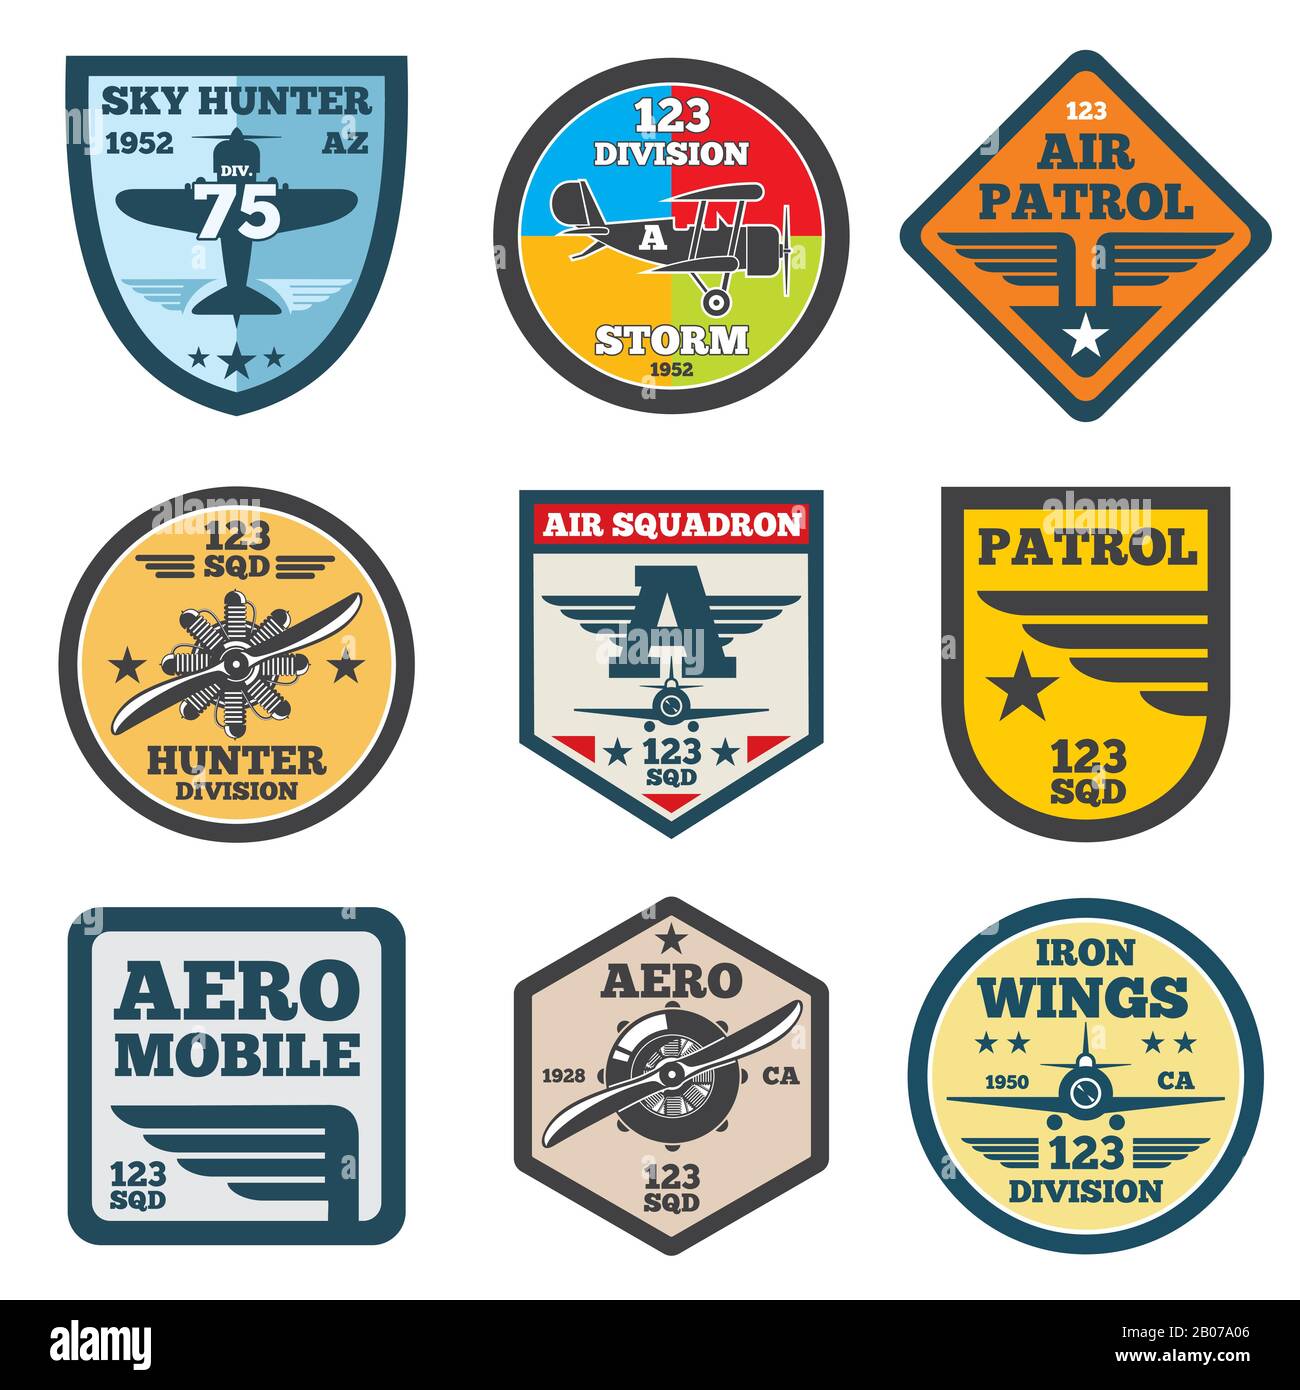 Army jet, aviation, air force vector labels, patch badges, emblems and logos set. Badge shield with wing illustration Stock Vector